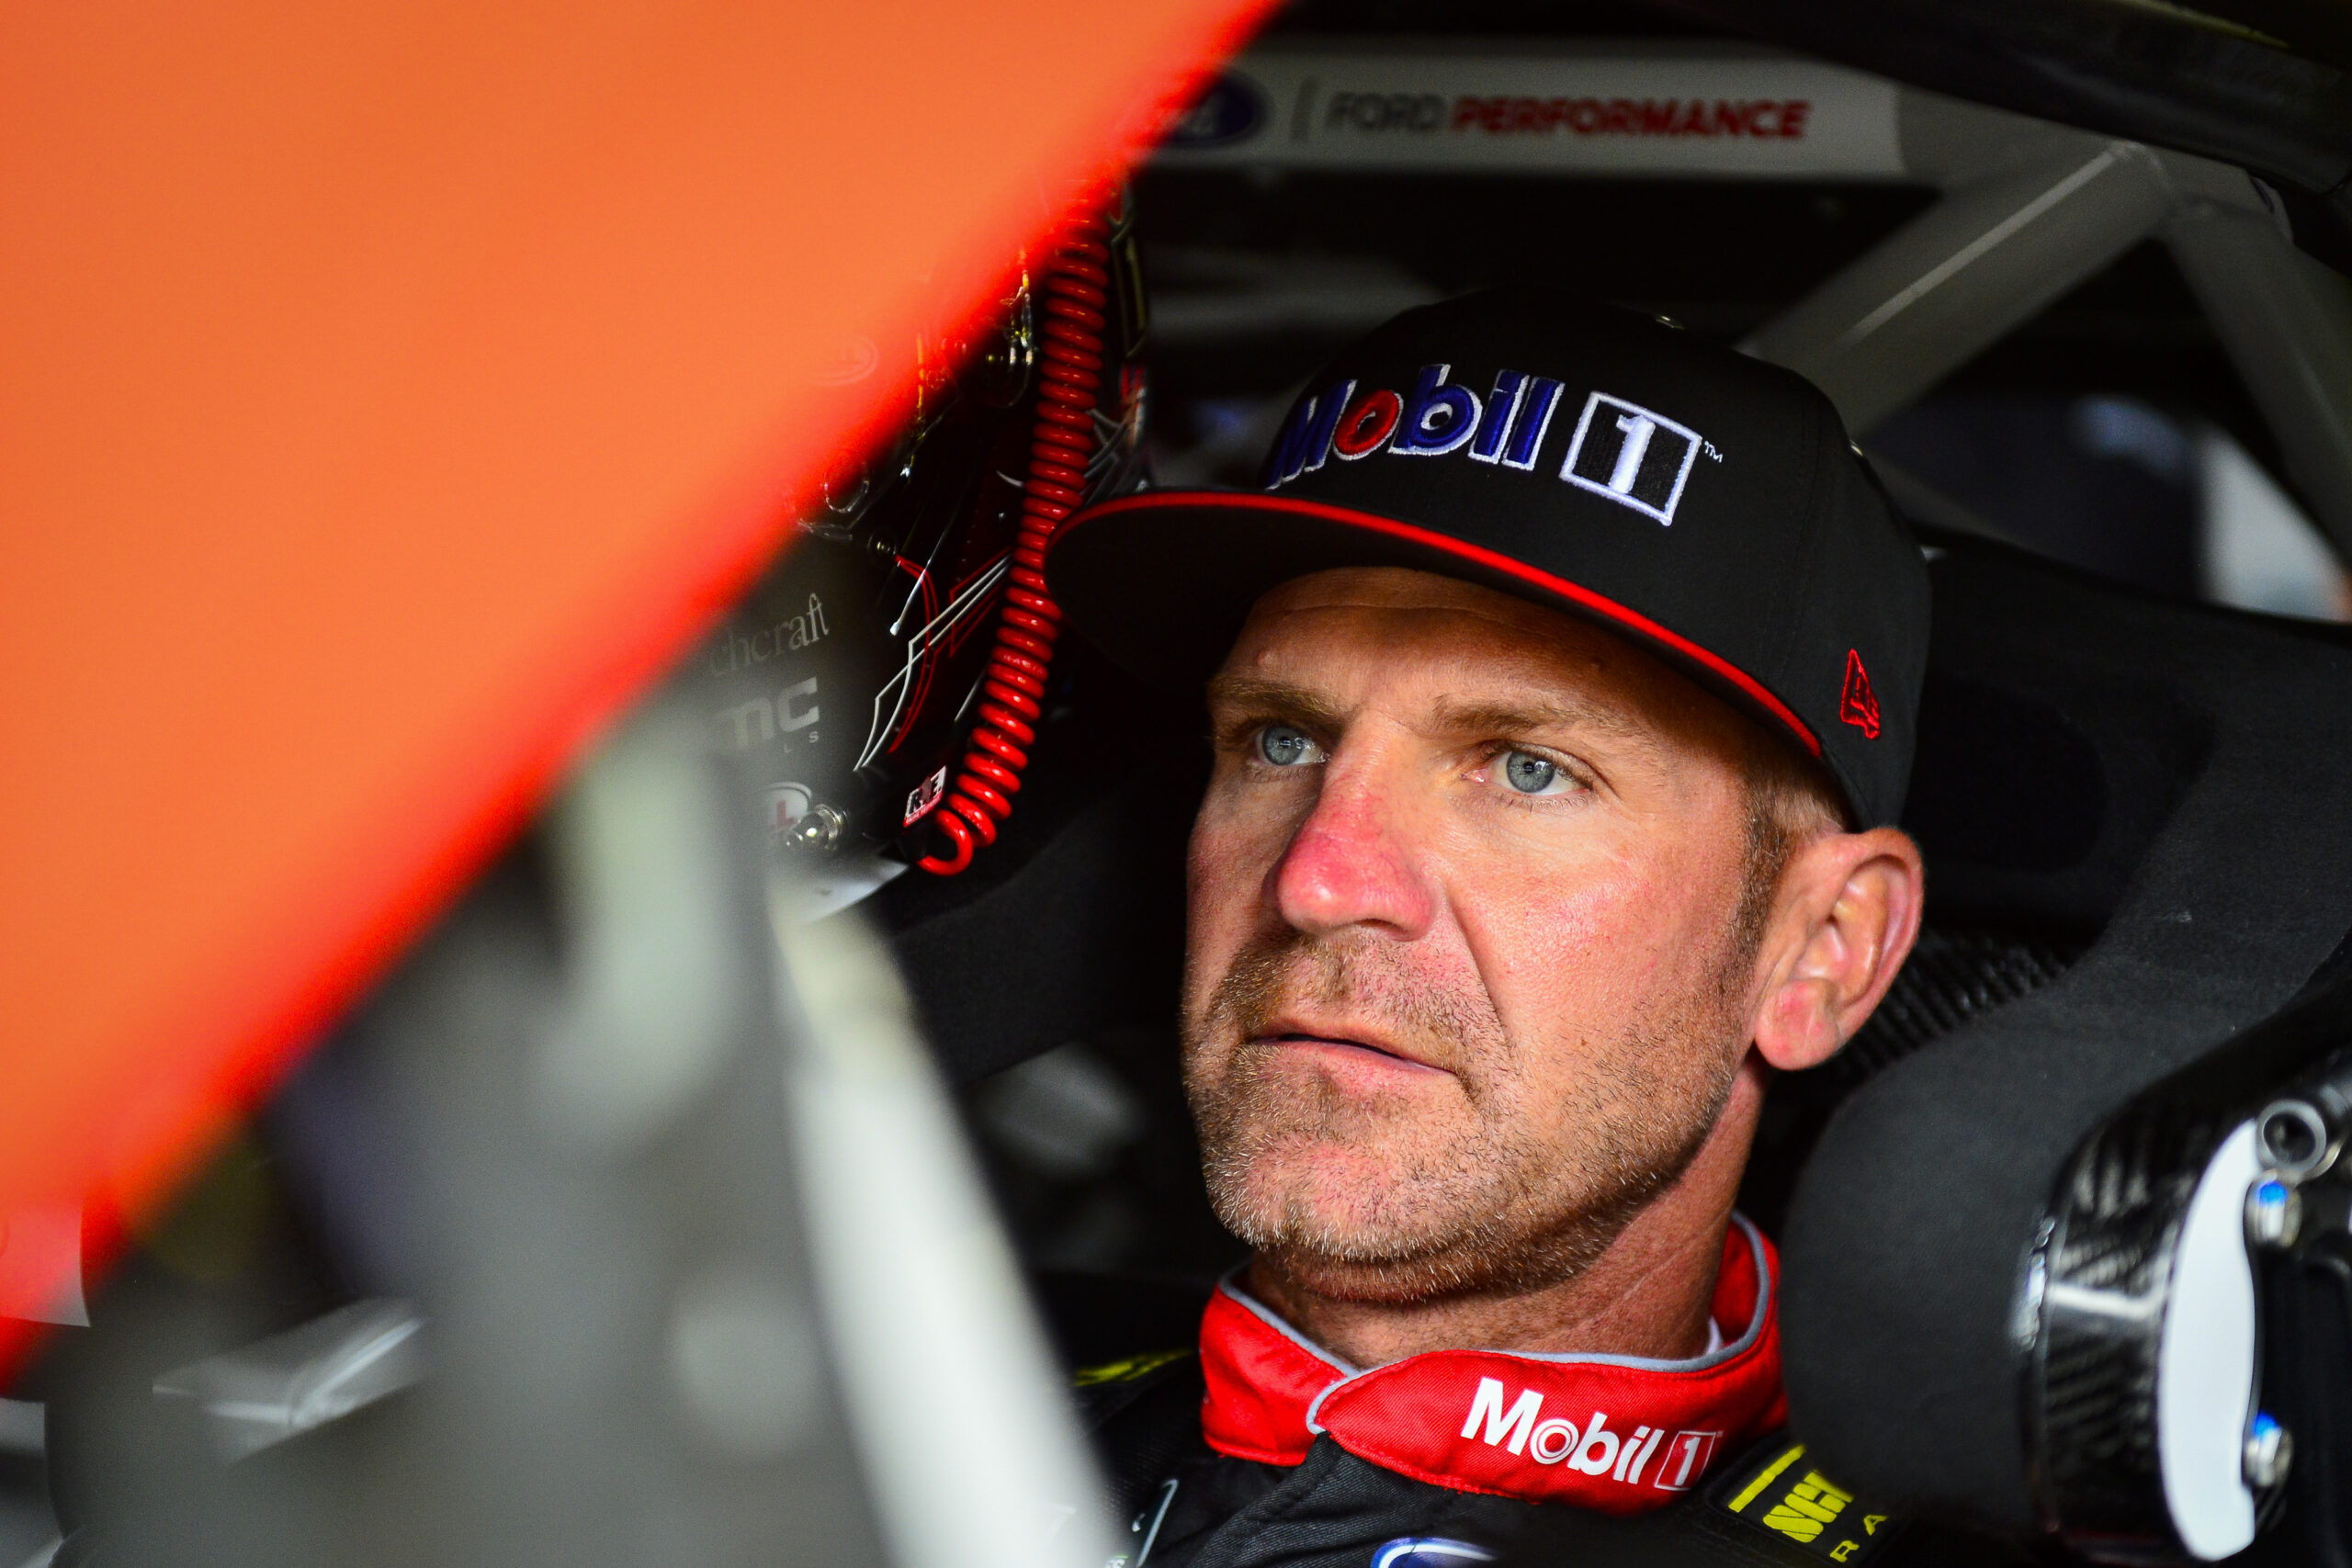 Clint Bowyer traffic accident, clint bowyer crash report, clint bowyer update